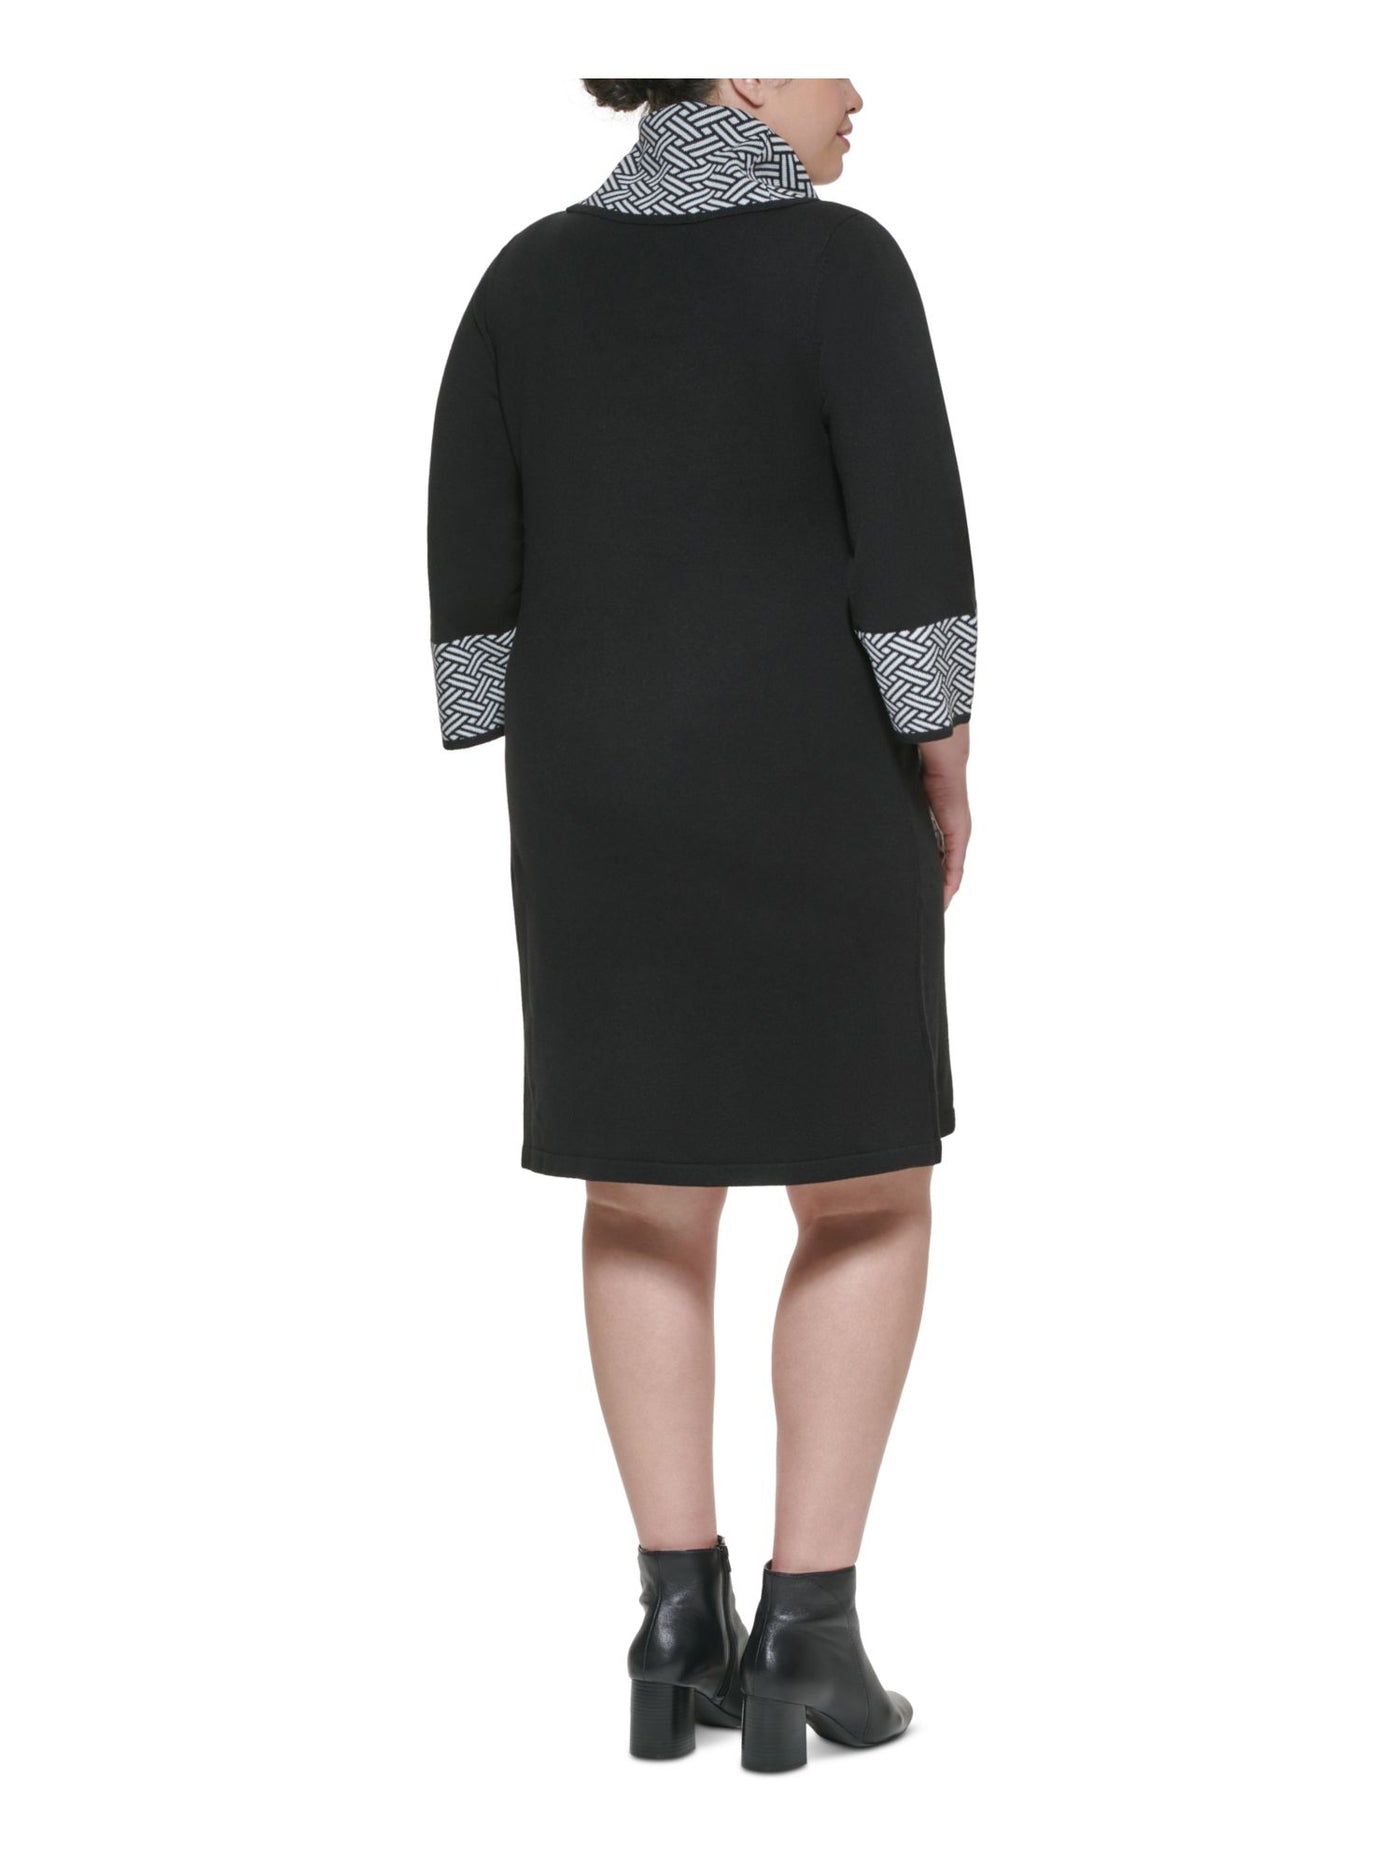 JESSICA HOWARD Womens Black Knit 3/4 Sleeve Cowl Neck Above The Knee Sweater Dress Plus 3X